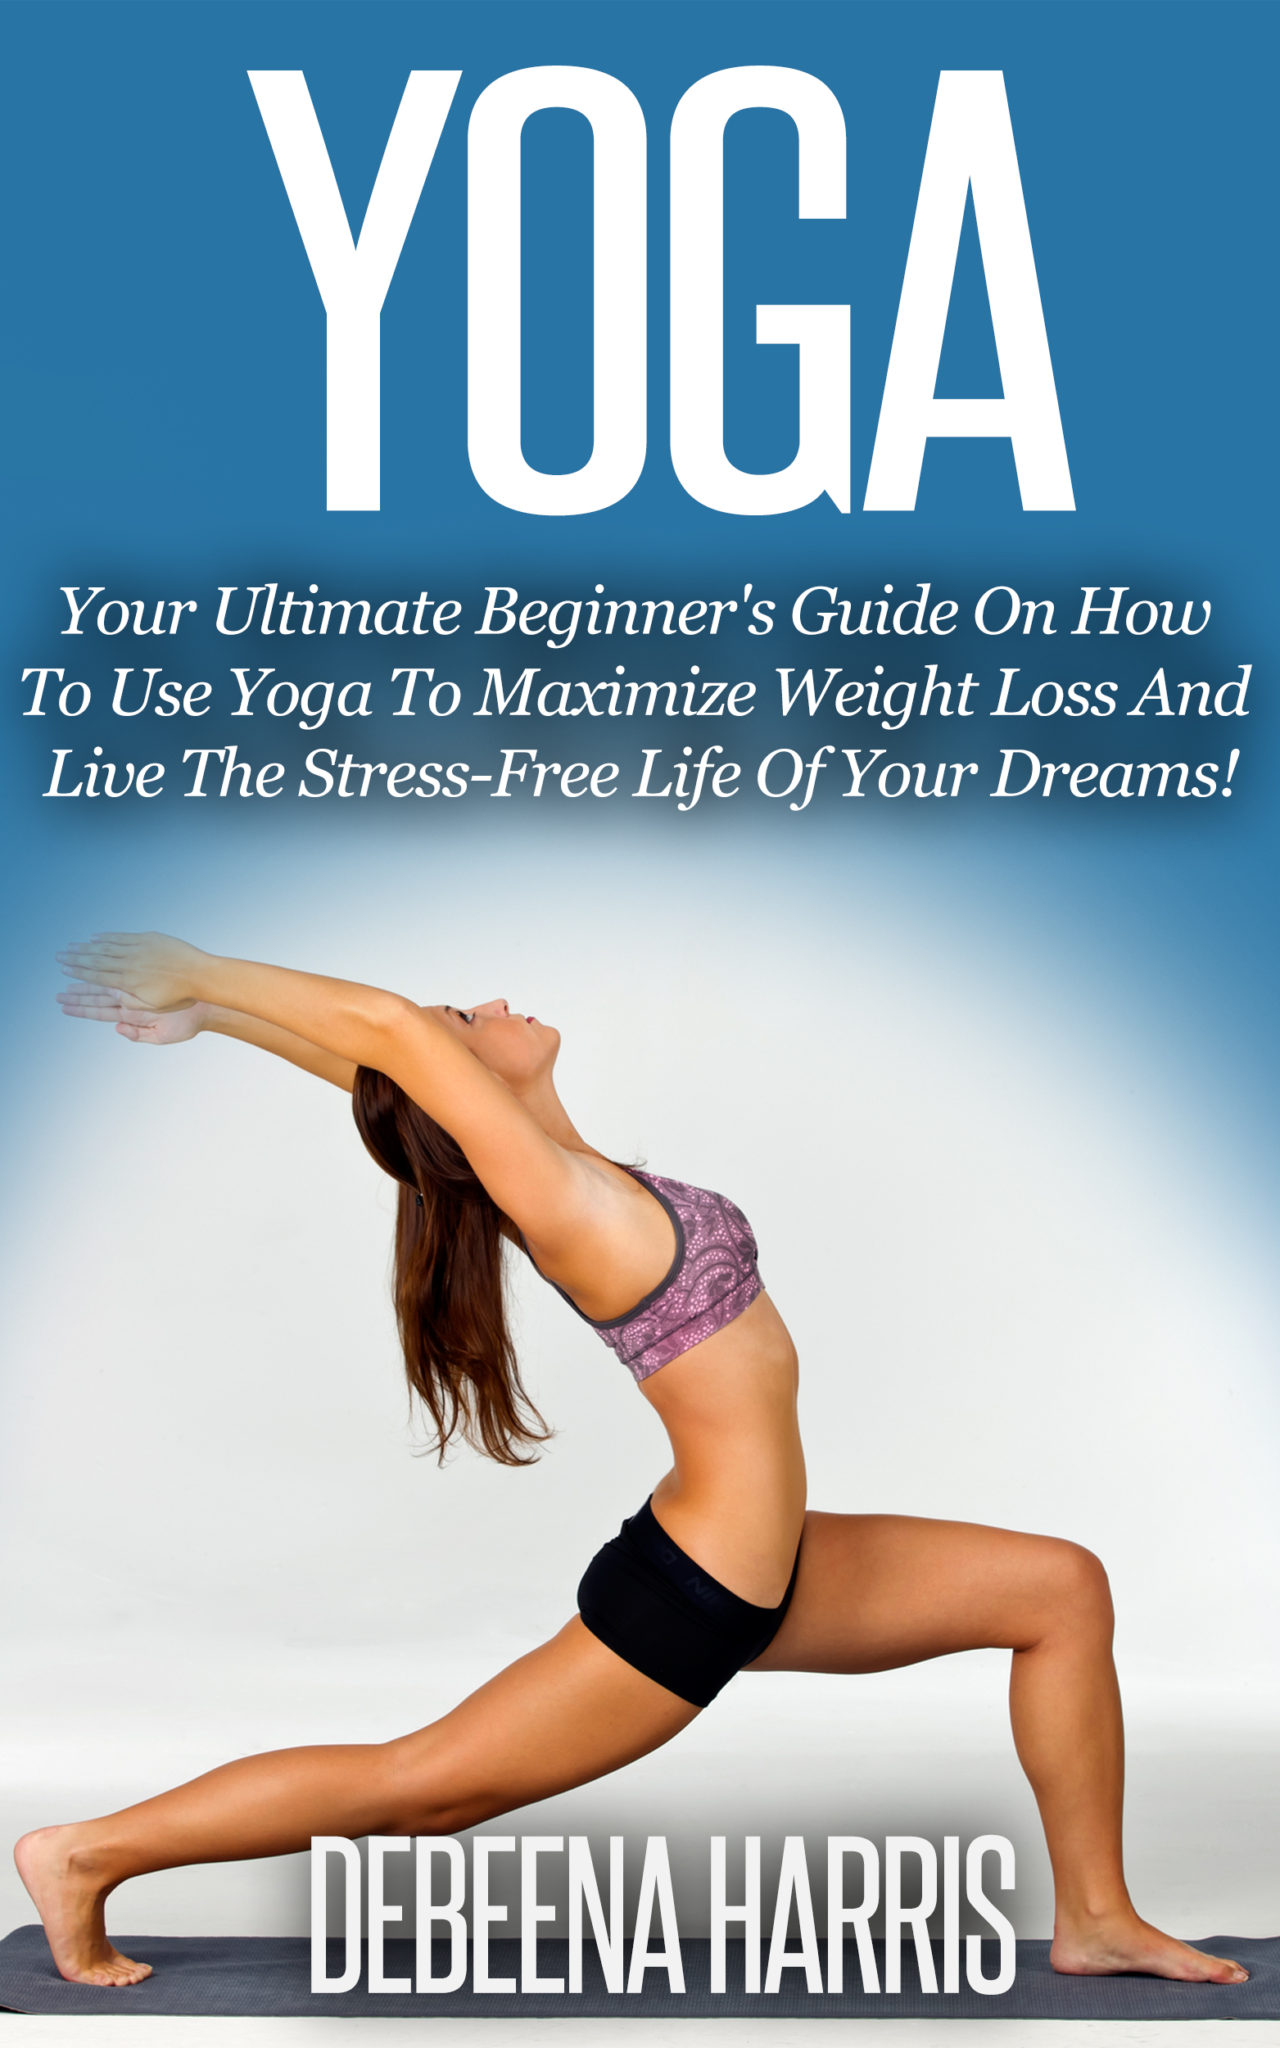 Yoga: Your Ultimate Beginner’s Guide On How To Use Yoga To Maximize Weight Loss And Live The Stress-Free Life Of Your Dreams! by Debeena Harris